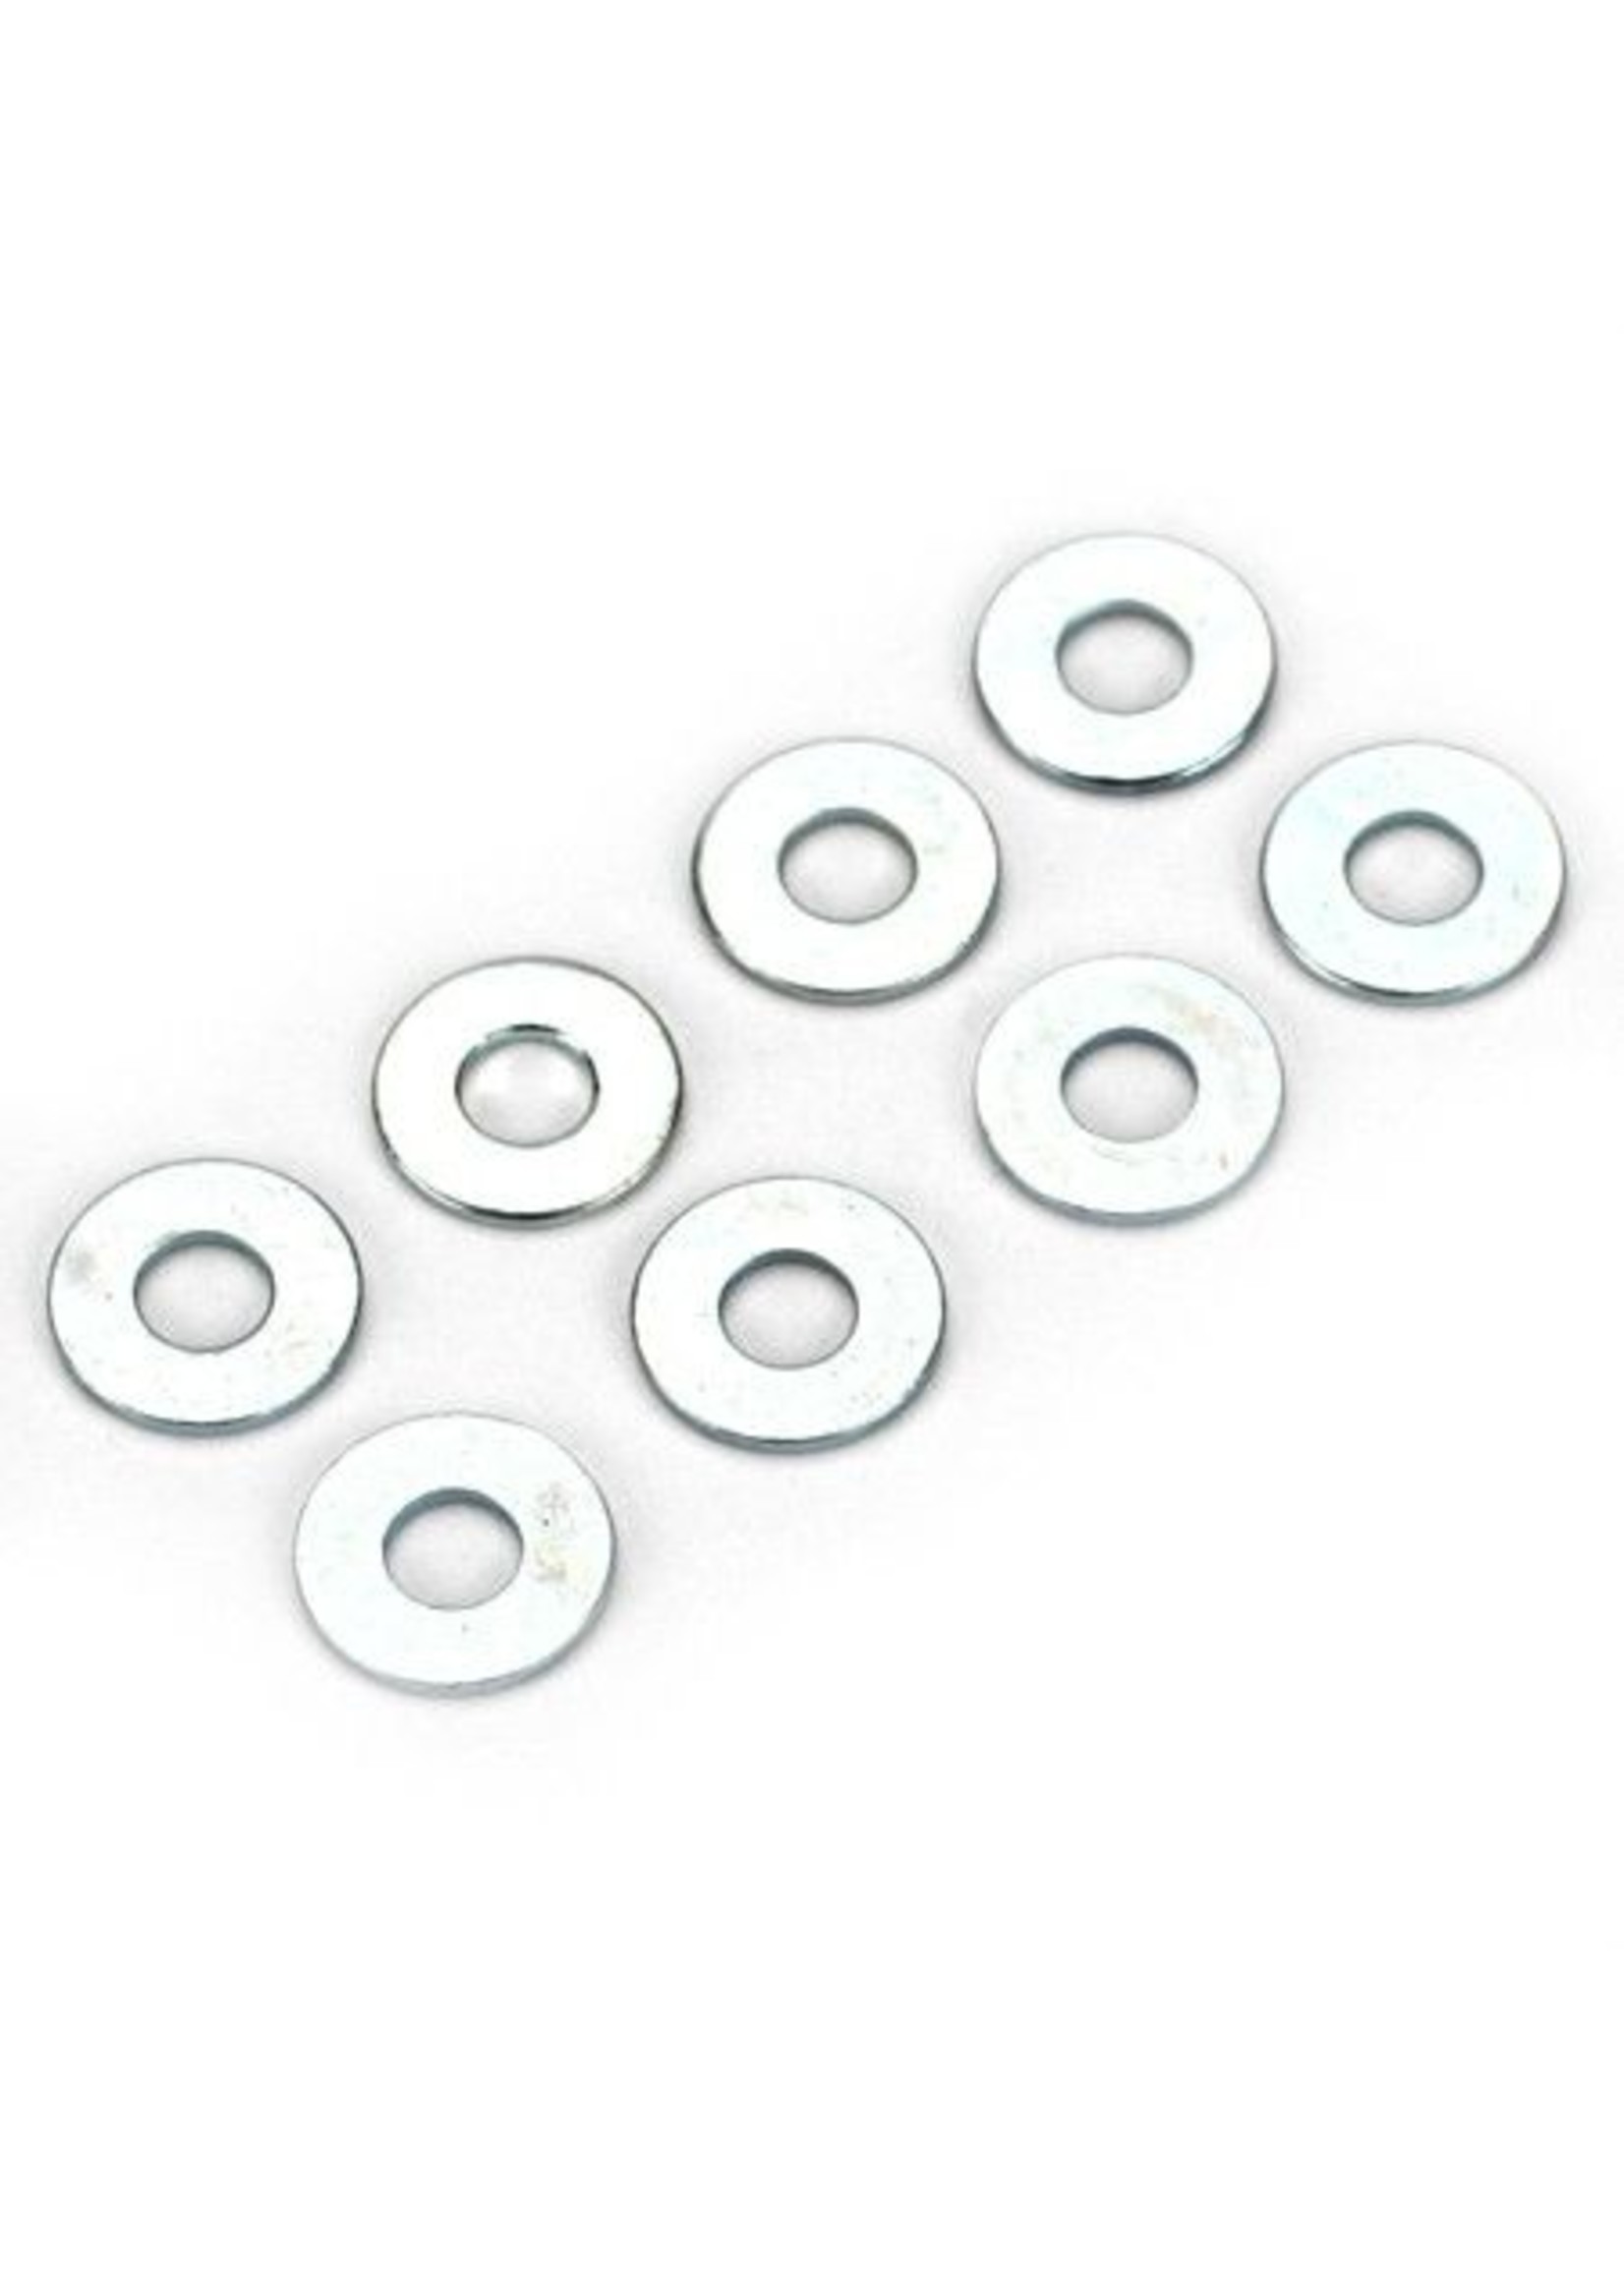 Dubro 2108 - Flat Washer 2.5mm (8)